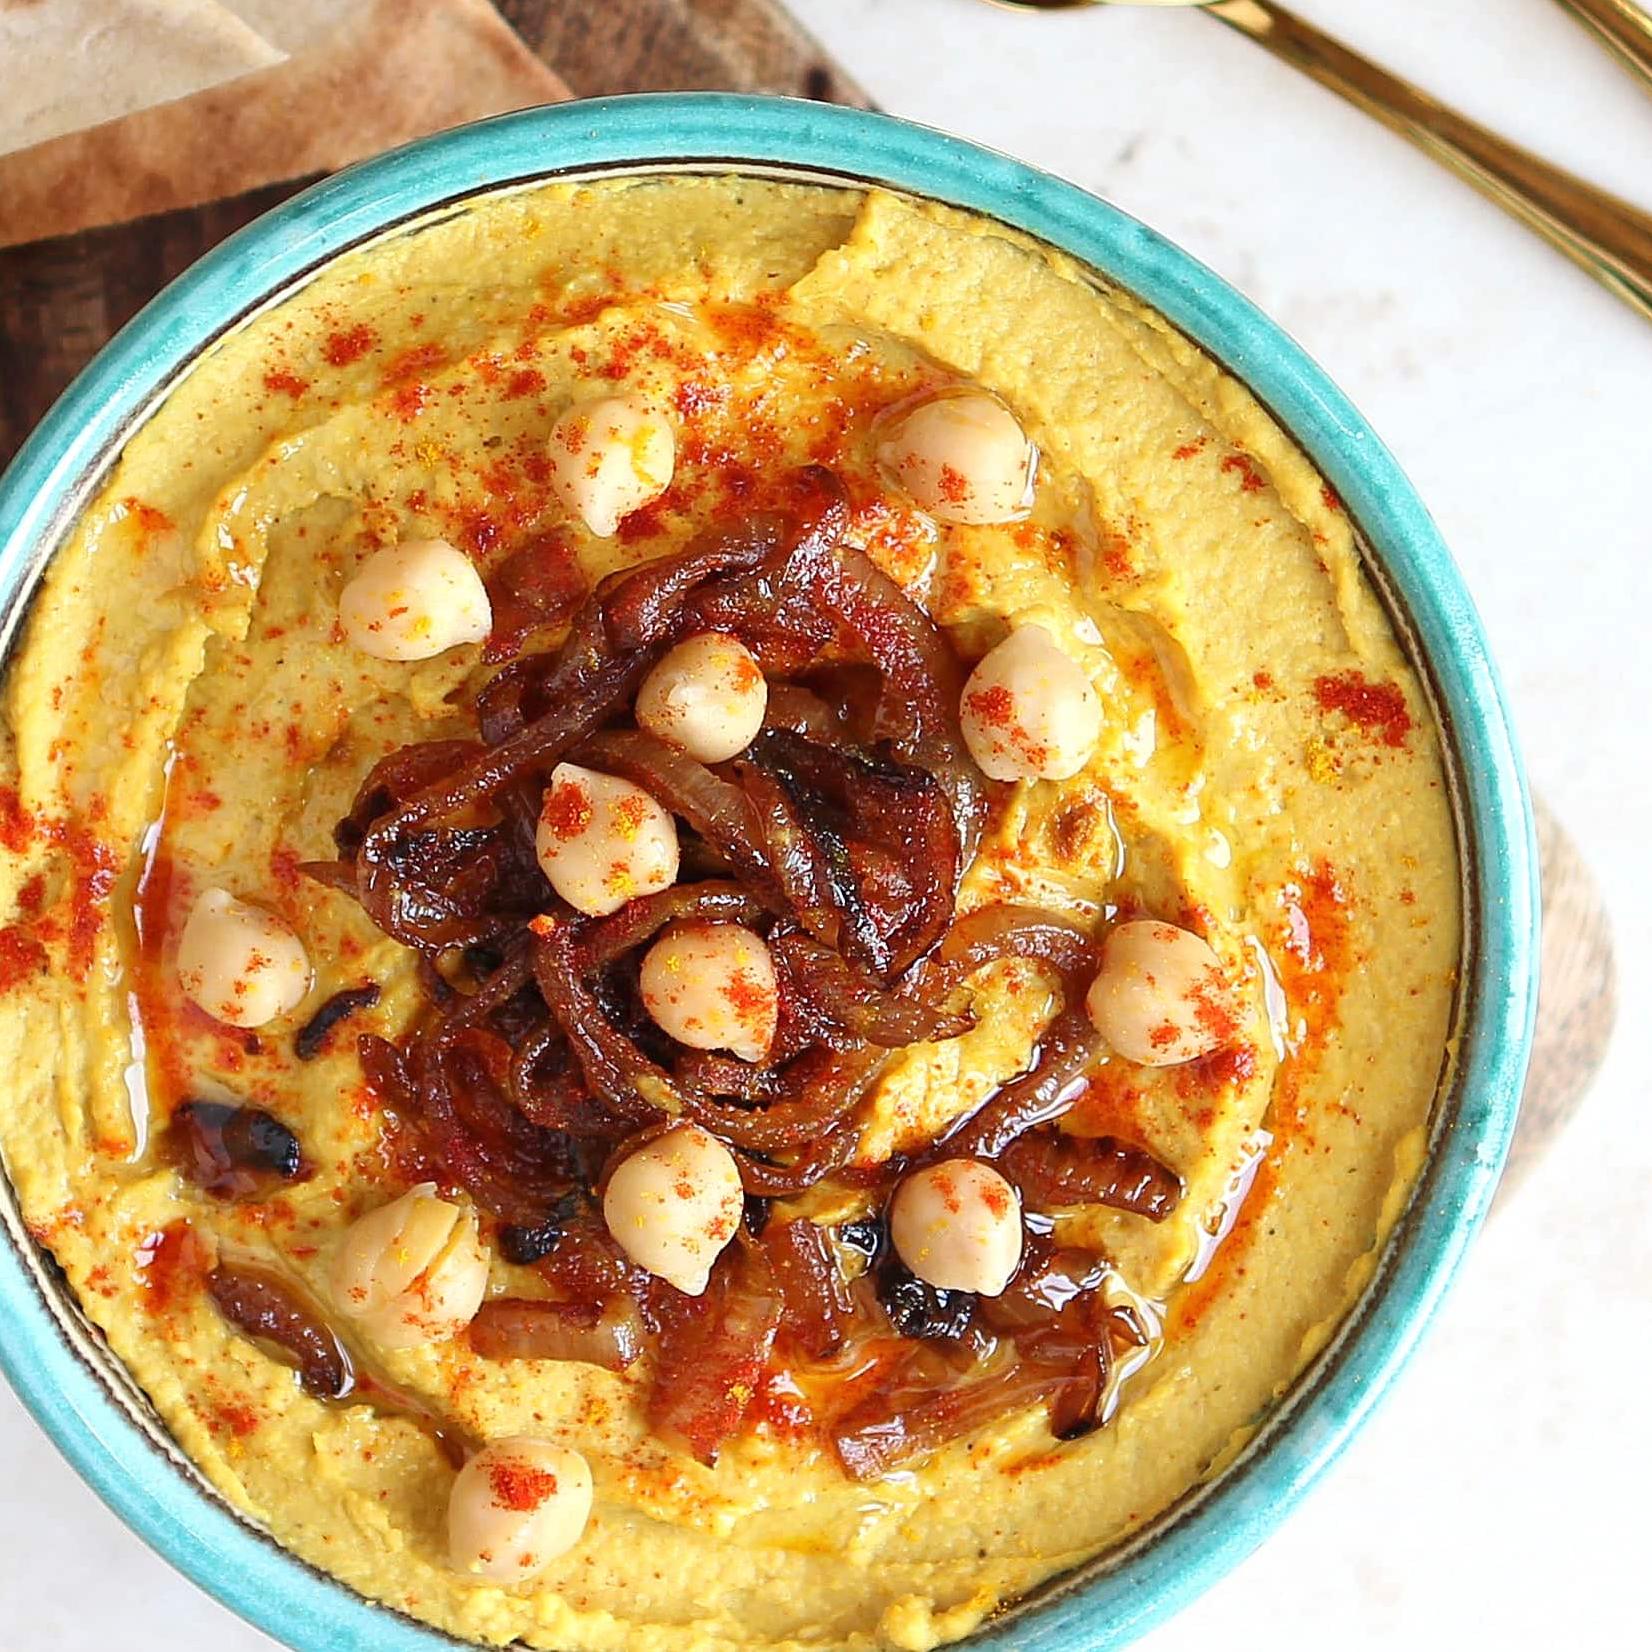  Impress your guests with this homemade hummus, packed with irresistible aromas and flavors